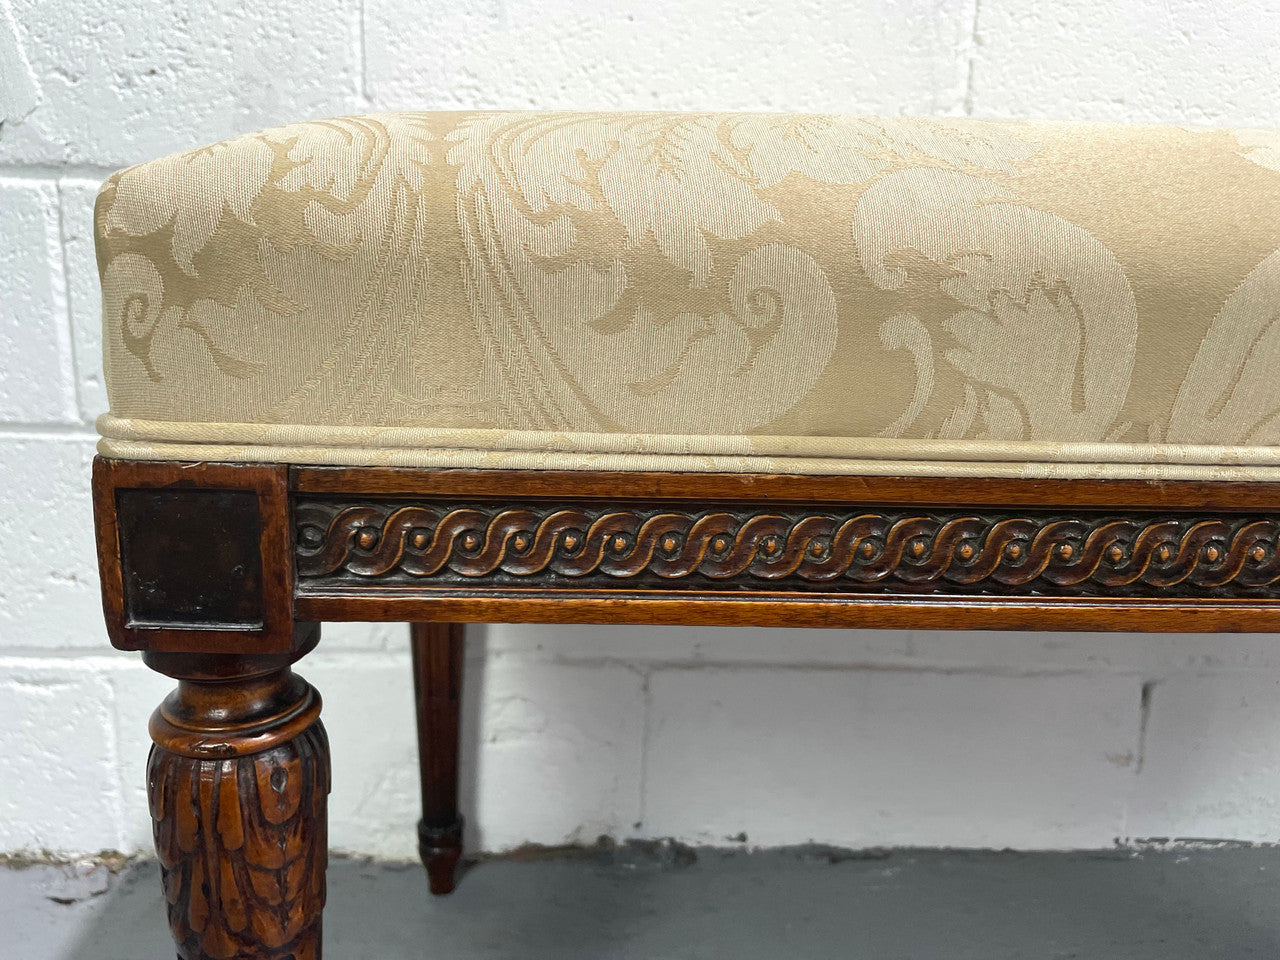 Nicely carved French Louis XVI style Walnut upholstered stool. The stool is in good condition and the frabic is in good used condition, please view photos as they help form part of the description.